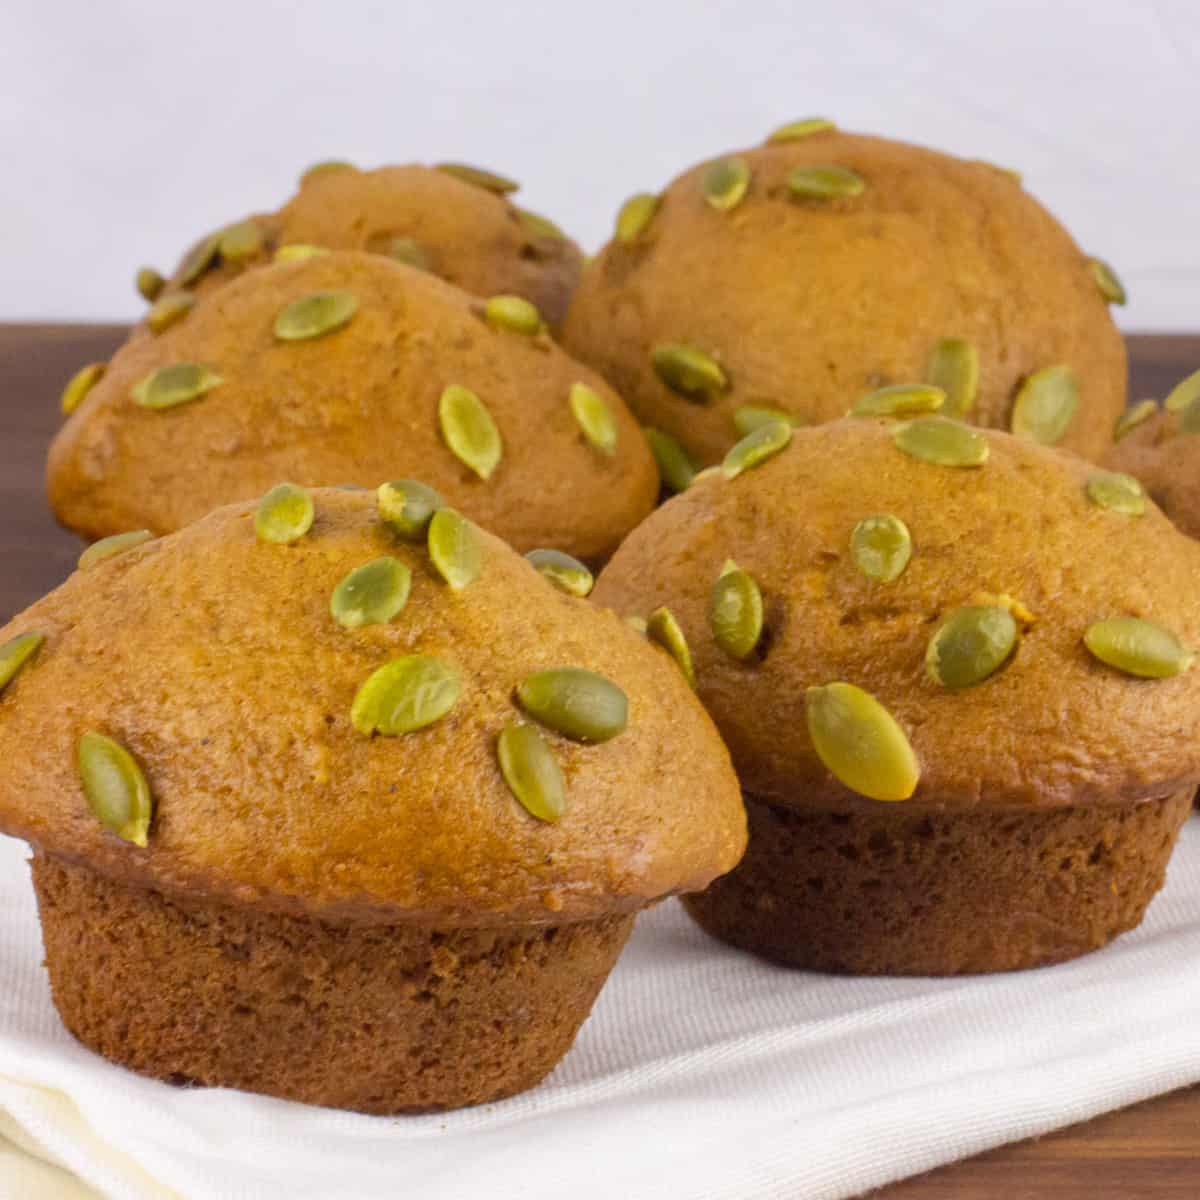 Five muffins that are topped with pepitas.